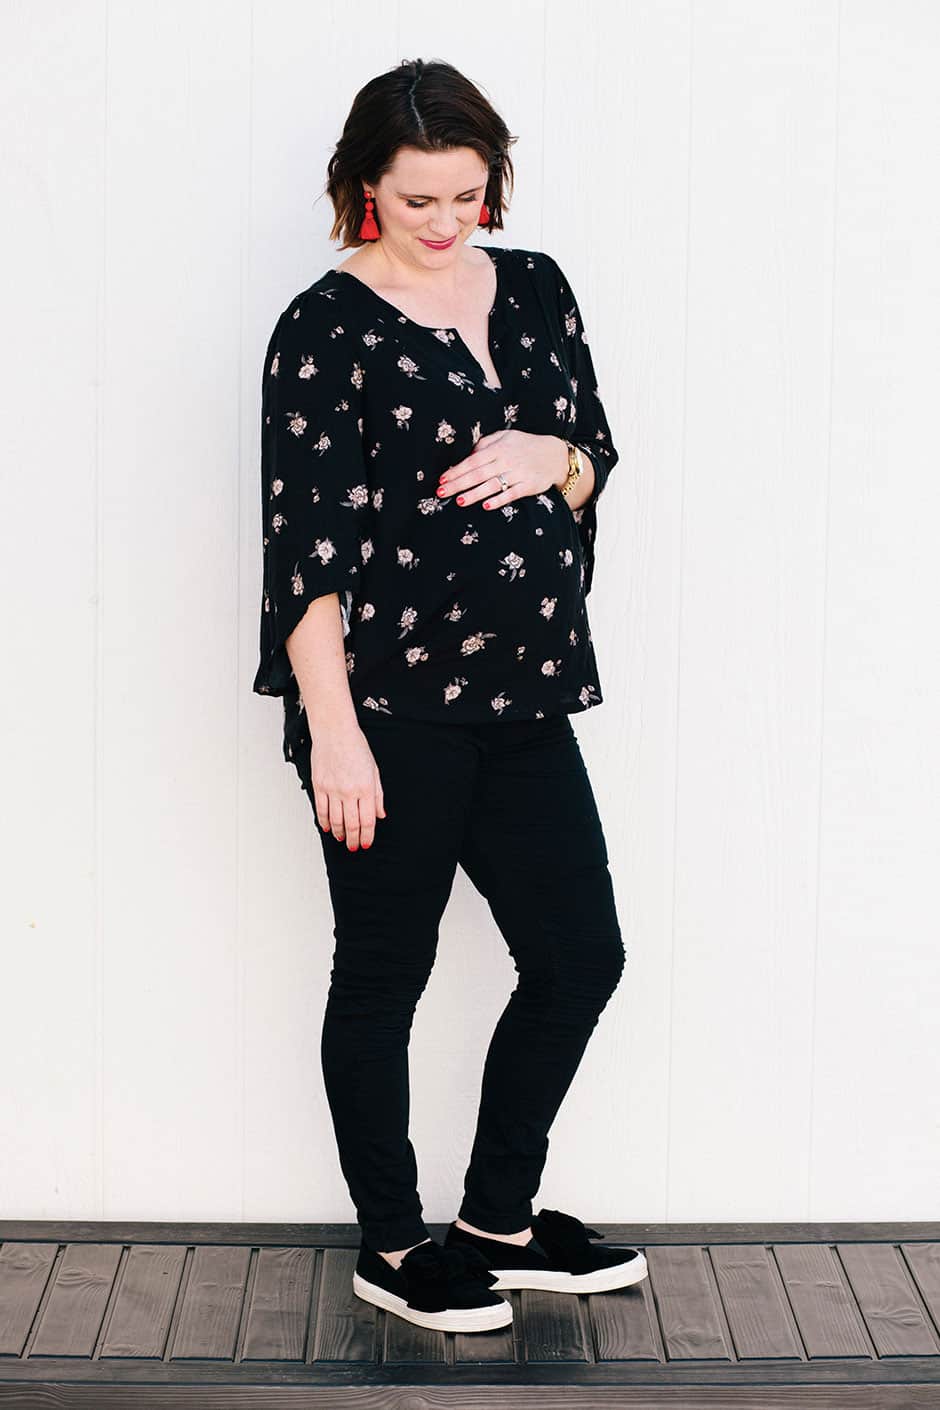 Looking for a home run sewing pattern for pregnancy and postpartum? Check out my version of the Phoenix blouse and how it's working through the third trimester and beyond! Make this DIY flowy top for your pregnancy or anytime you need a comfy, flattering blouse.